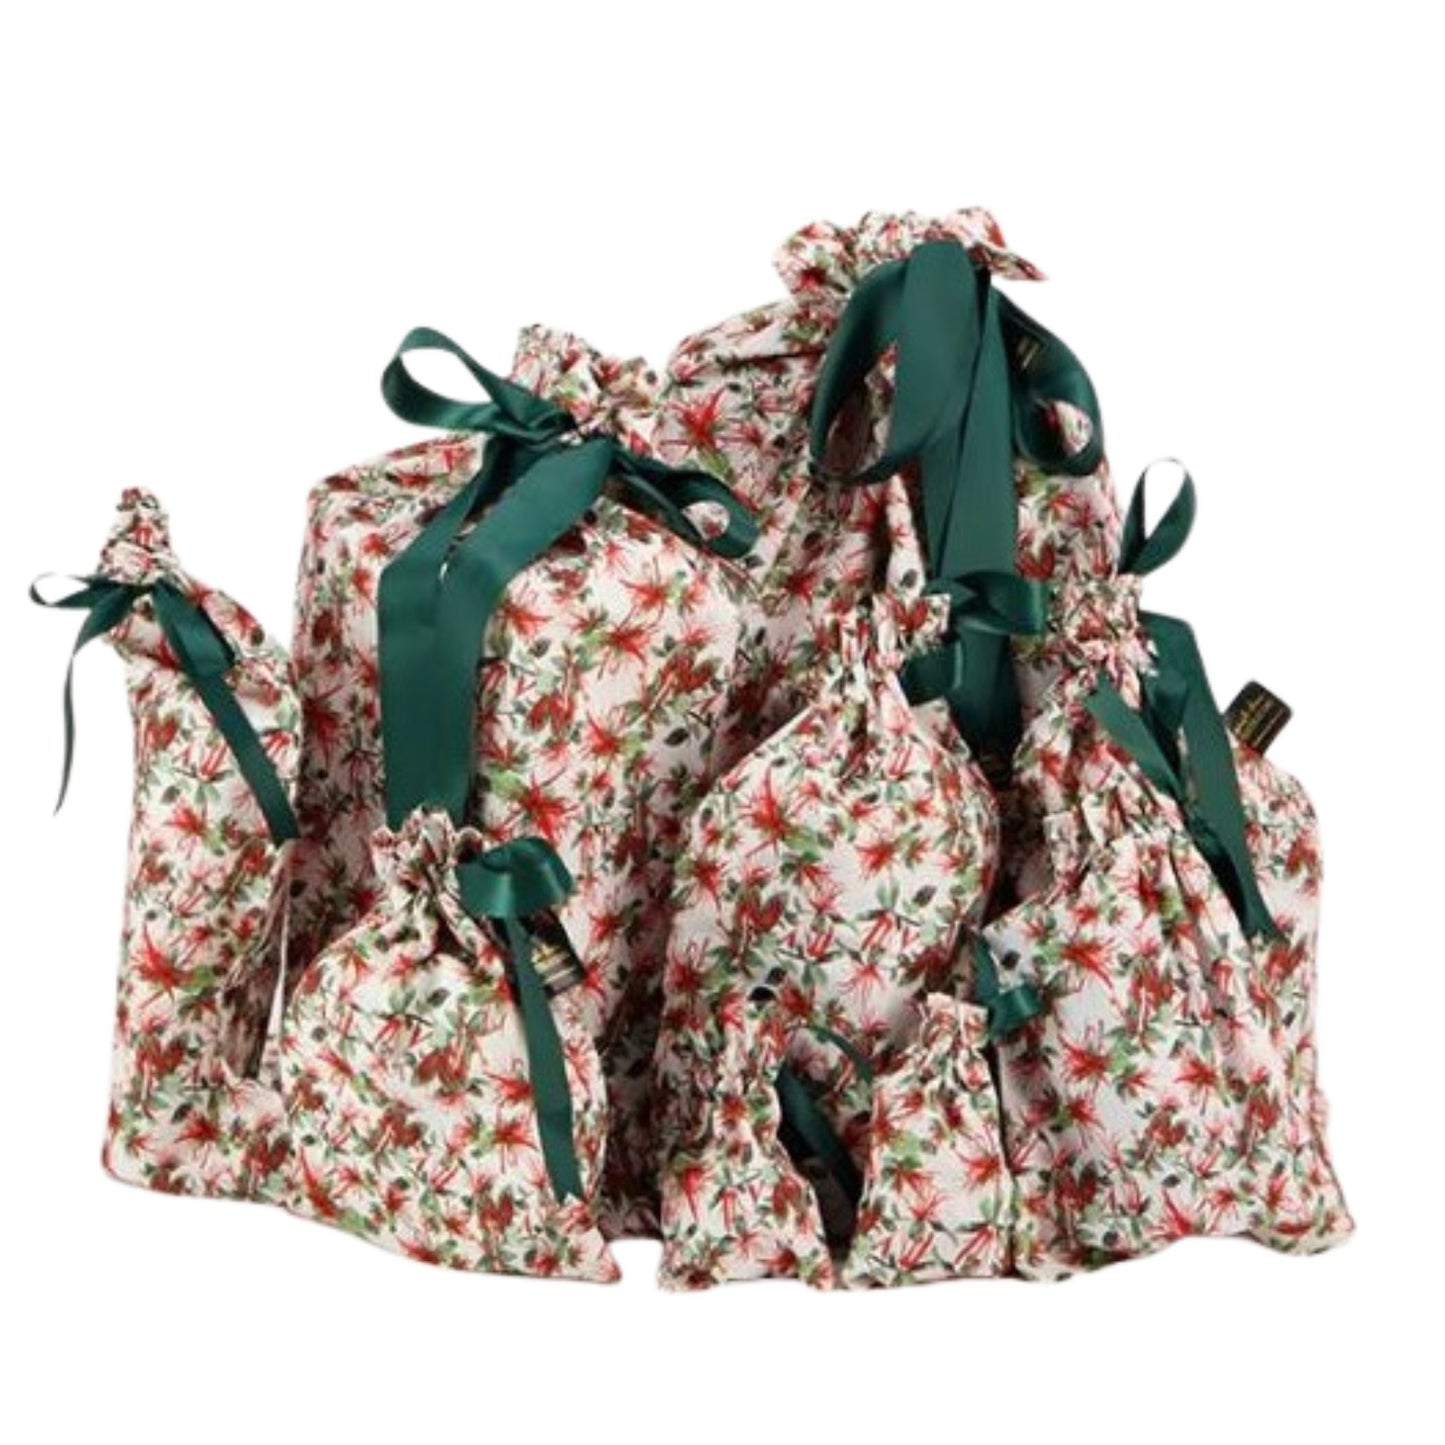 Reusable Christmas gift bags with a native NZ mistletoe print and tied with a green ribbon.